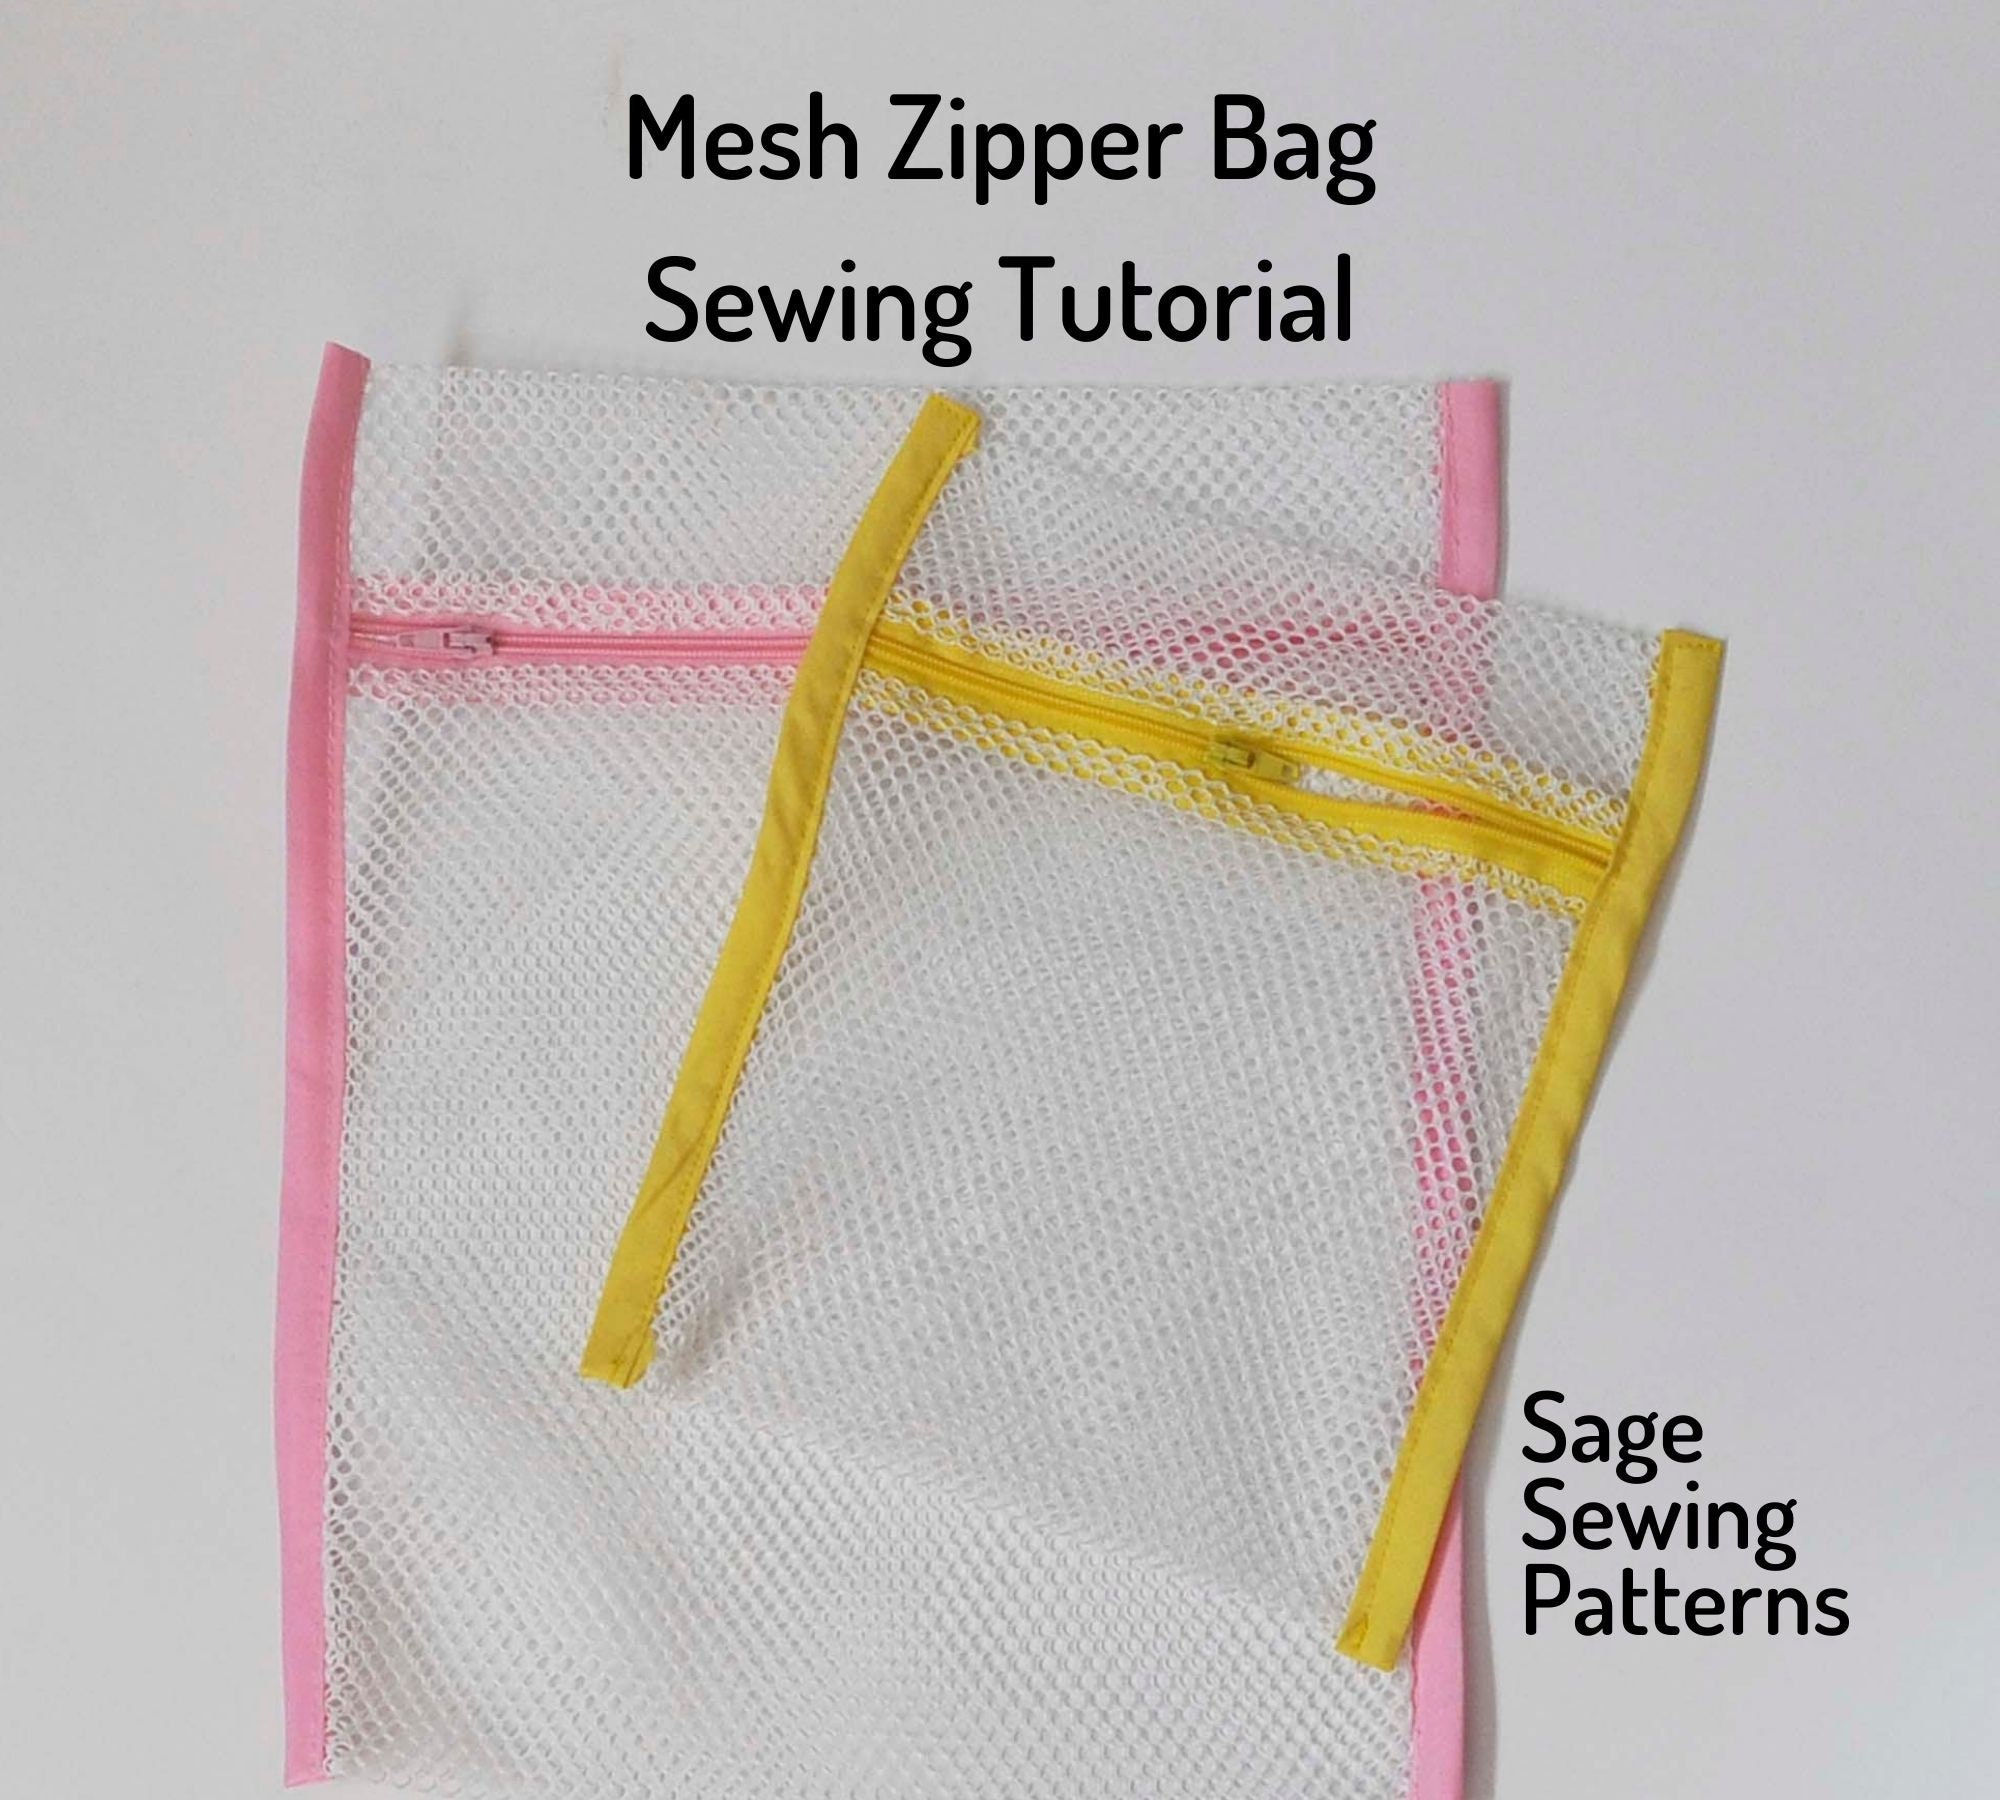 Small Mesh Laundry Bag With Zipper. Small Hole Mesh Laundry Bag